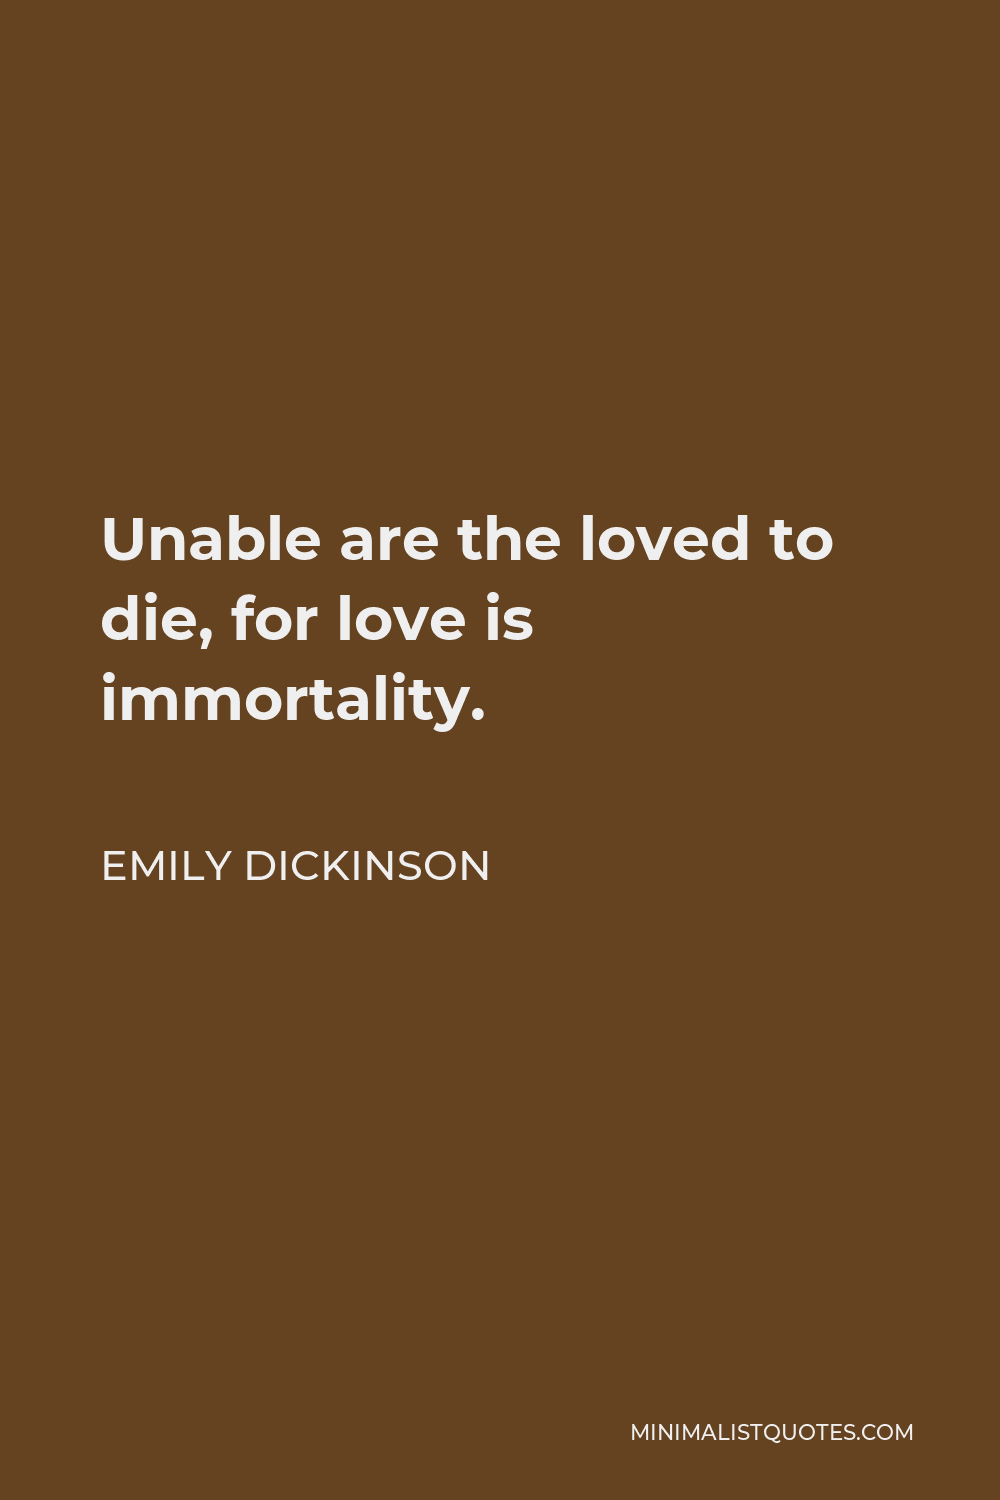 Emily Dickinson Quote: Unable are the loved to die, for love is ...